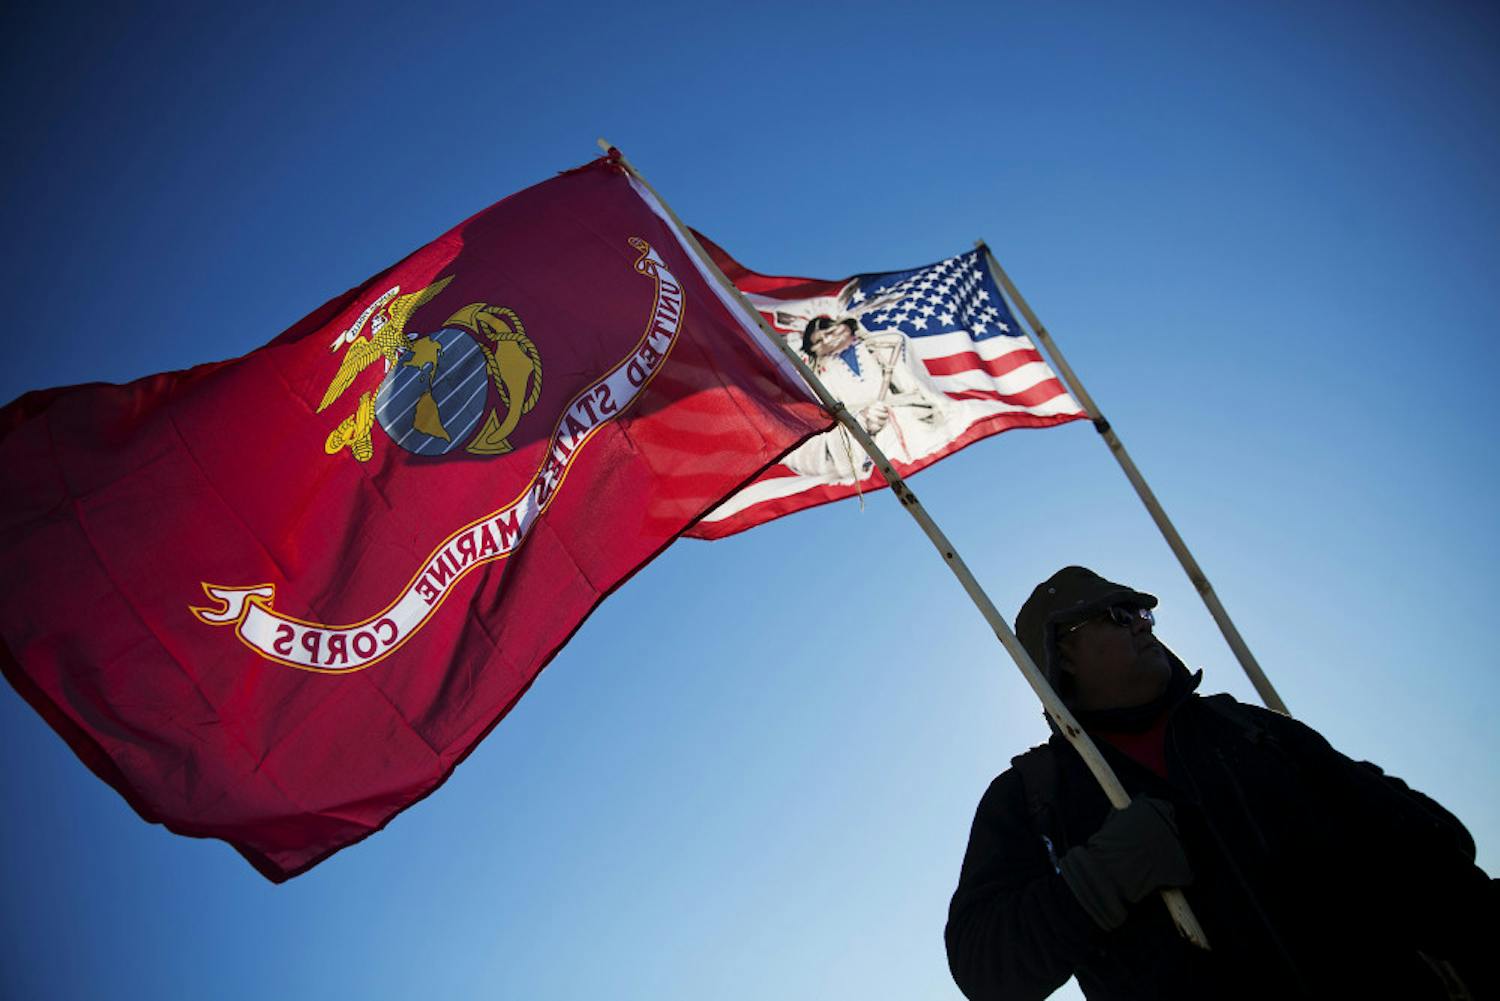 Marine Corps veteran and Northern Paiute and Pit River Native American Audie Noneo, of Susanville, Calif., holds the Marine Corps flag at the Oceti Sakowin camp where people have gathered to protest the Dakota Access oil pipeline in Cannon Ball, N.D., Sunday, Dec. 4, 2016. The U.S. Army Corps of Engineers said Sunday it won't grant easement for the Dakota Access oil pipeline in southern North Dakota.